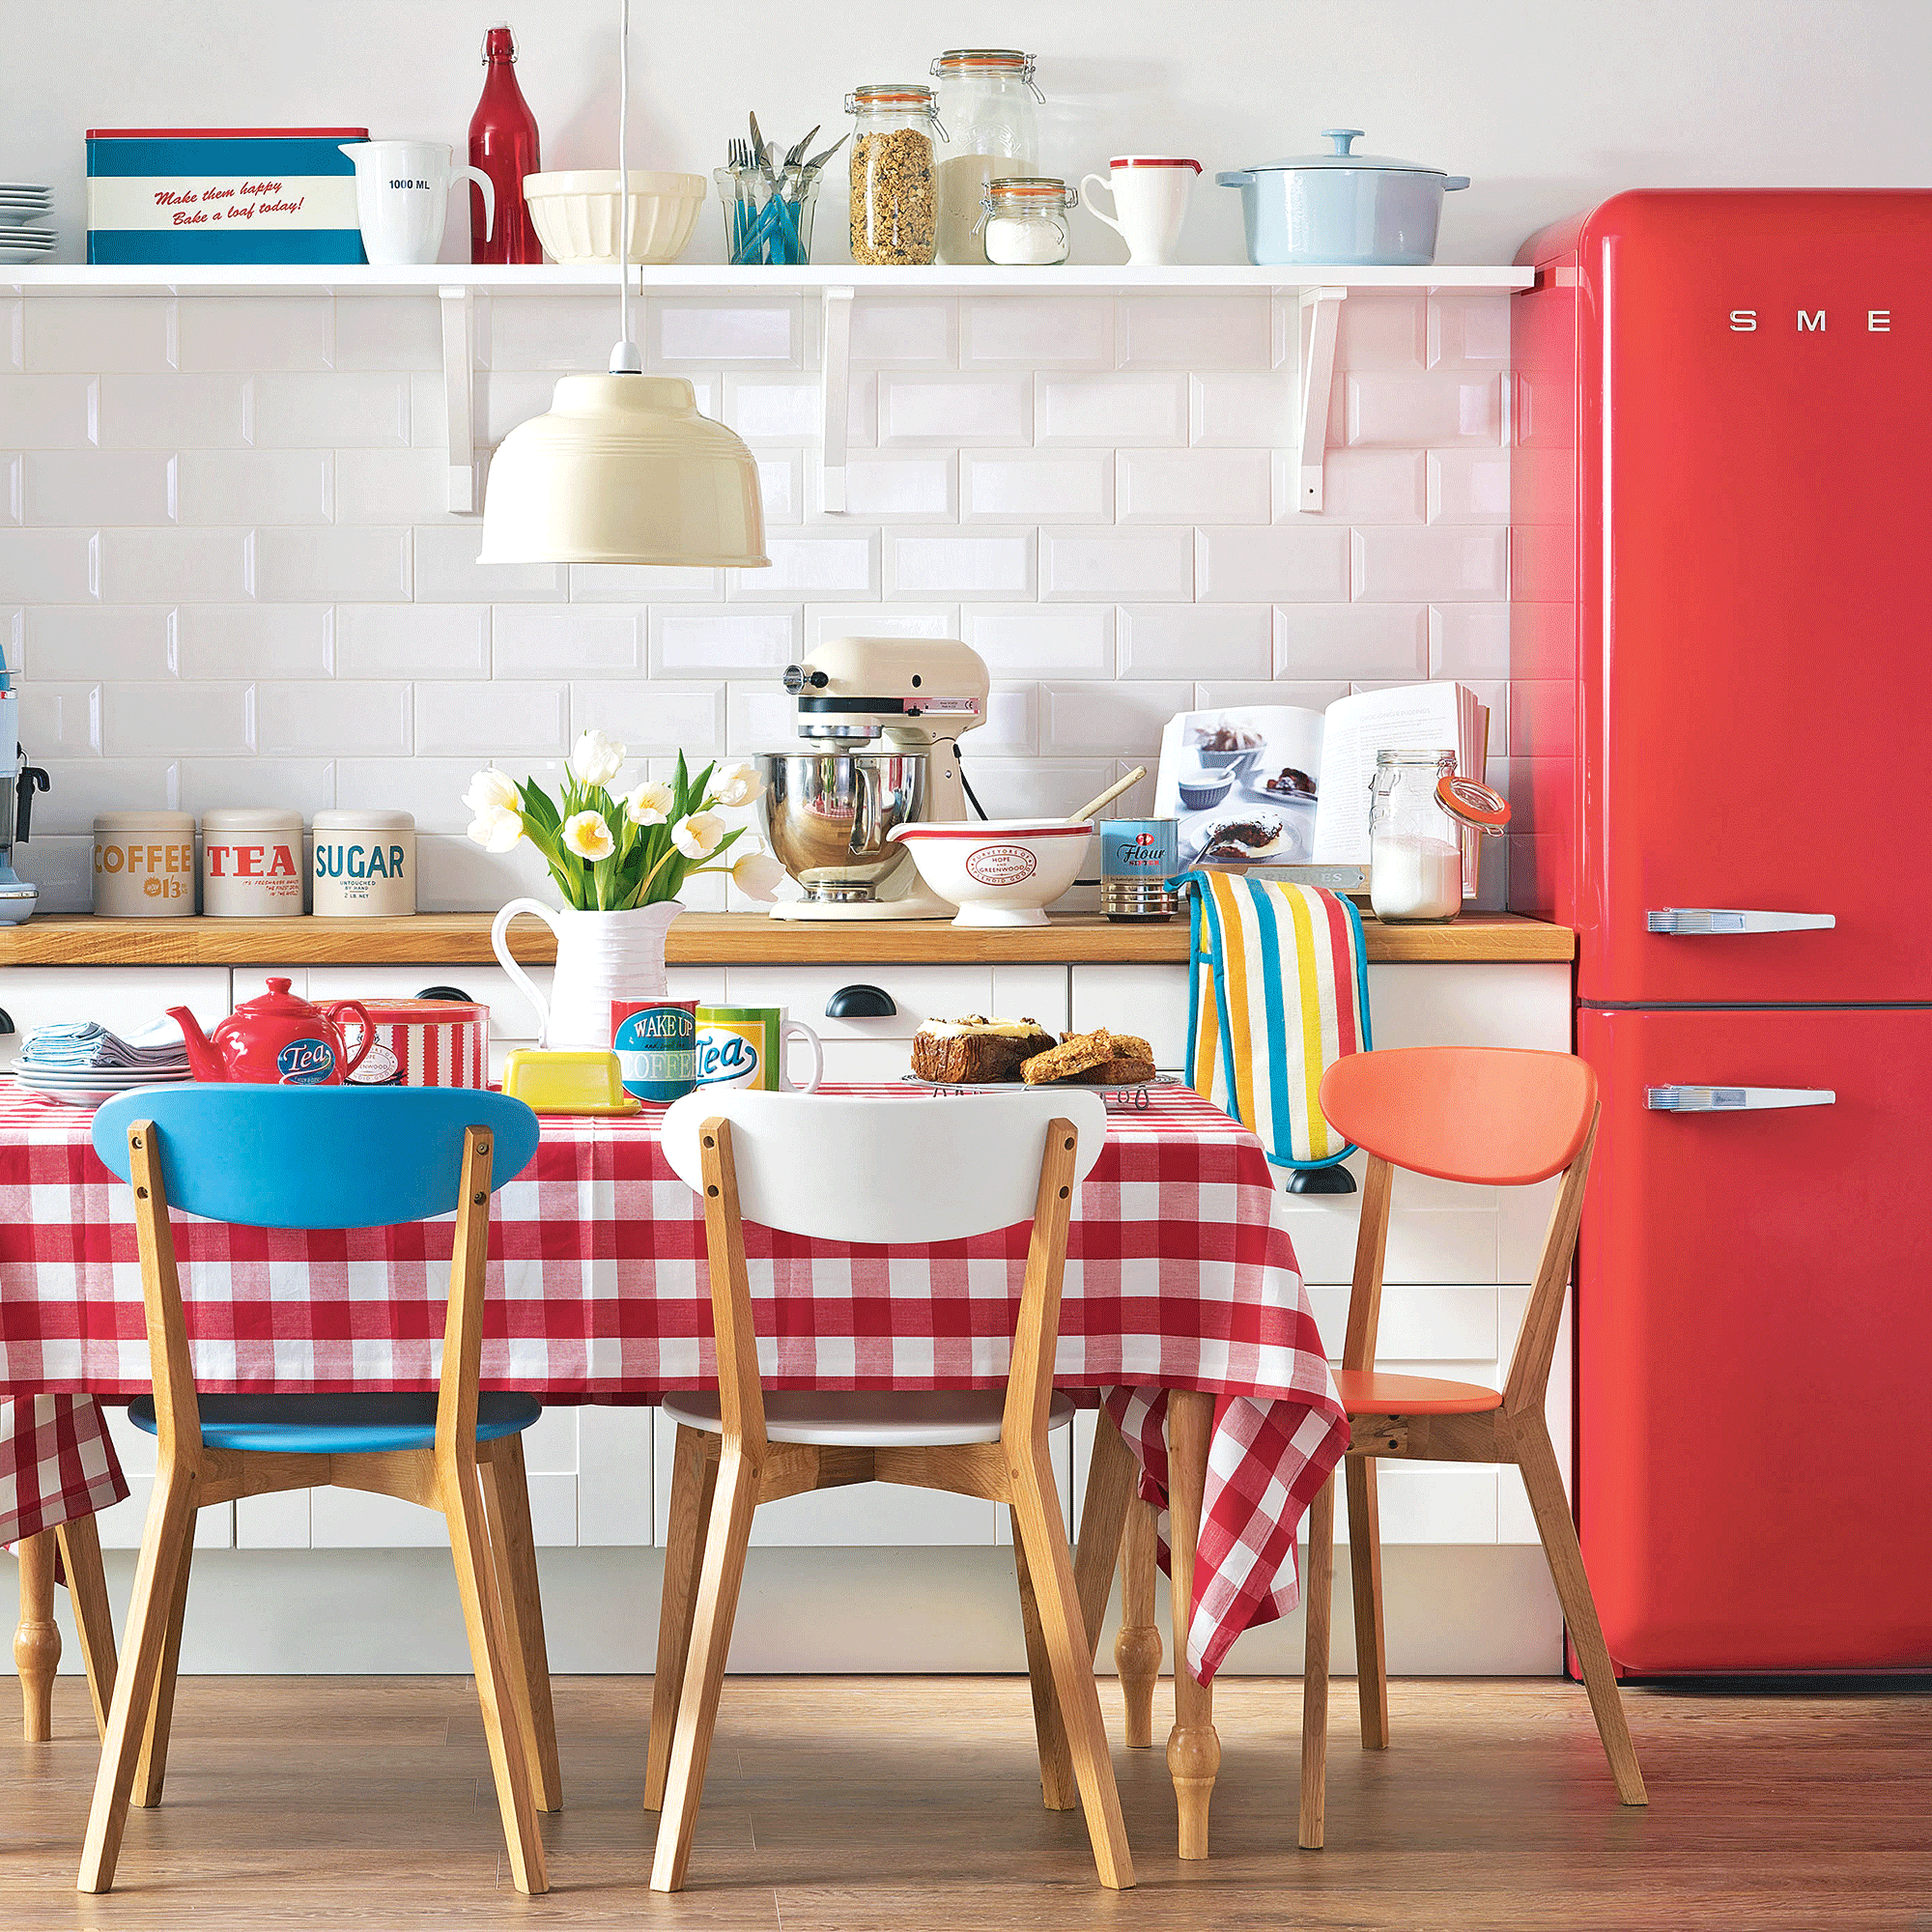 Red fridge freezer in a kitchen with wooden table